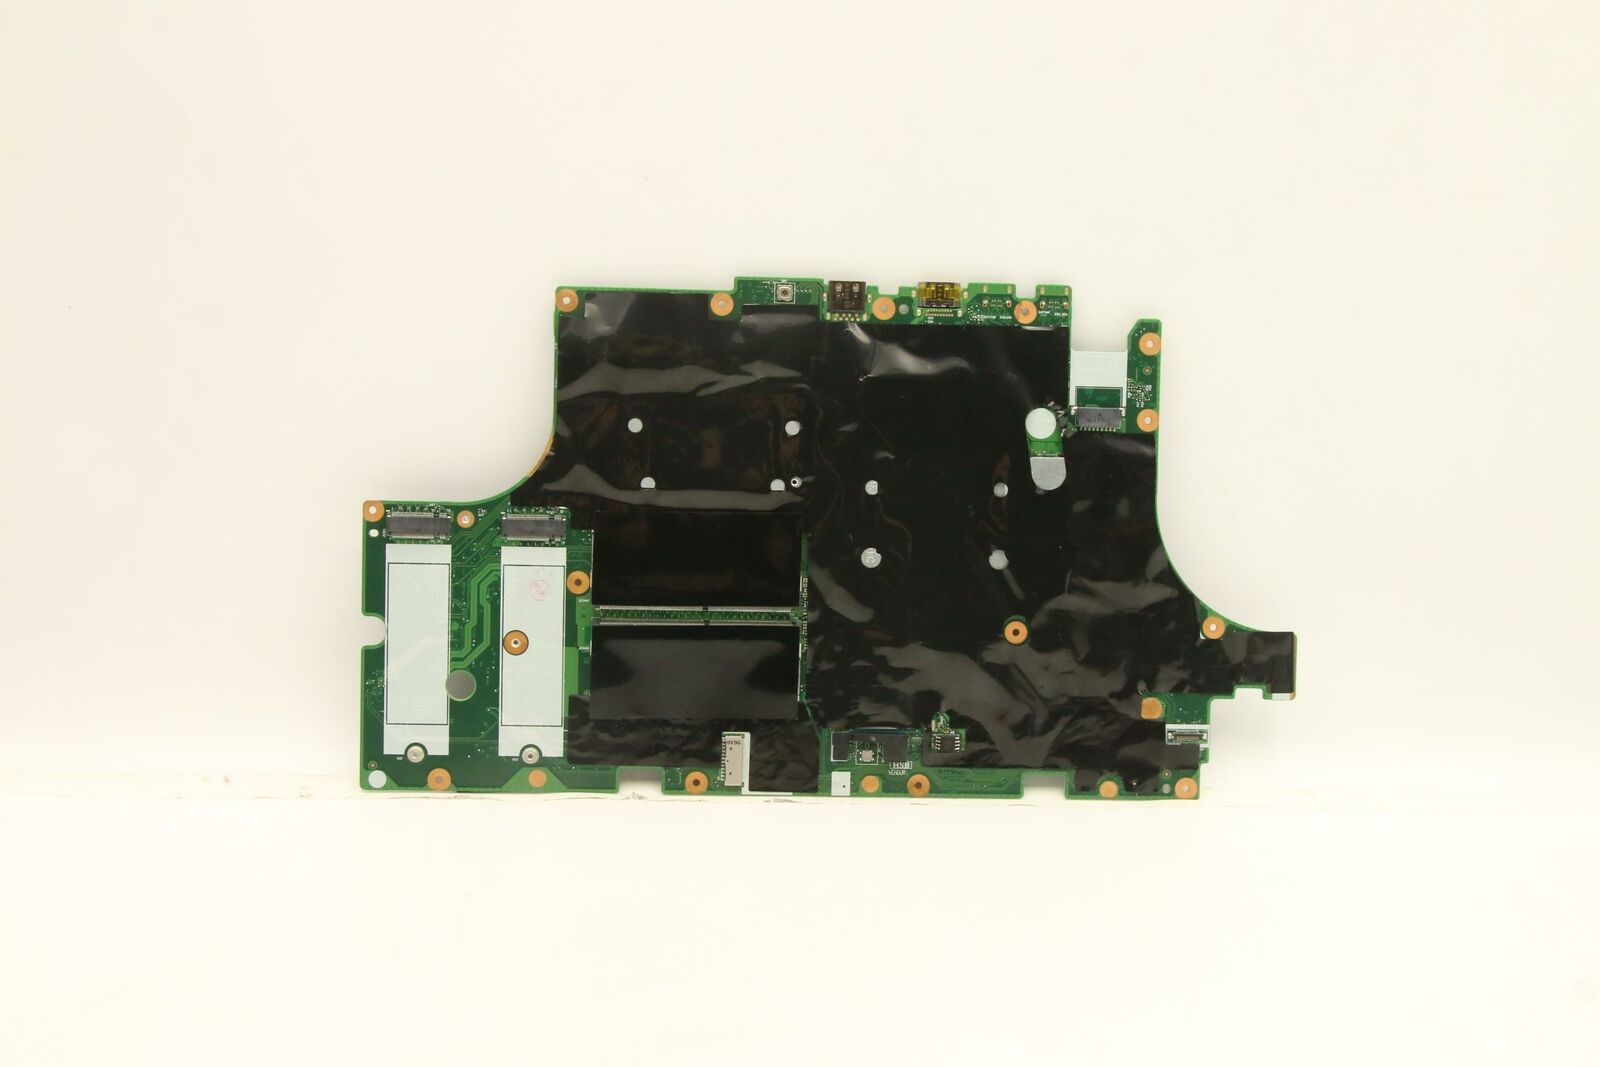 Lenovo Motherboard for Thinkpad Laptop, Part #: 01YU283 Information Technology DEX 